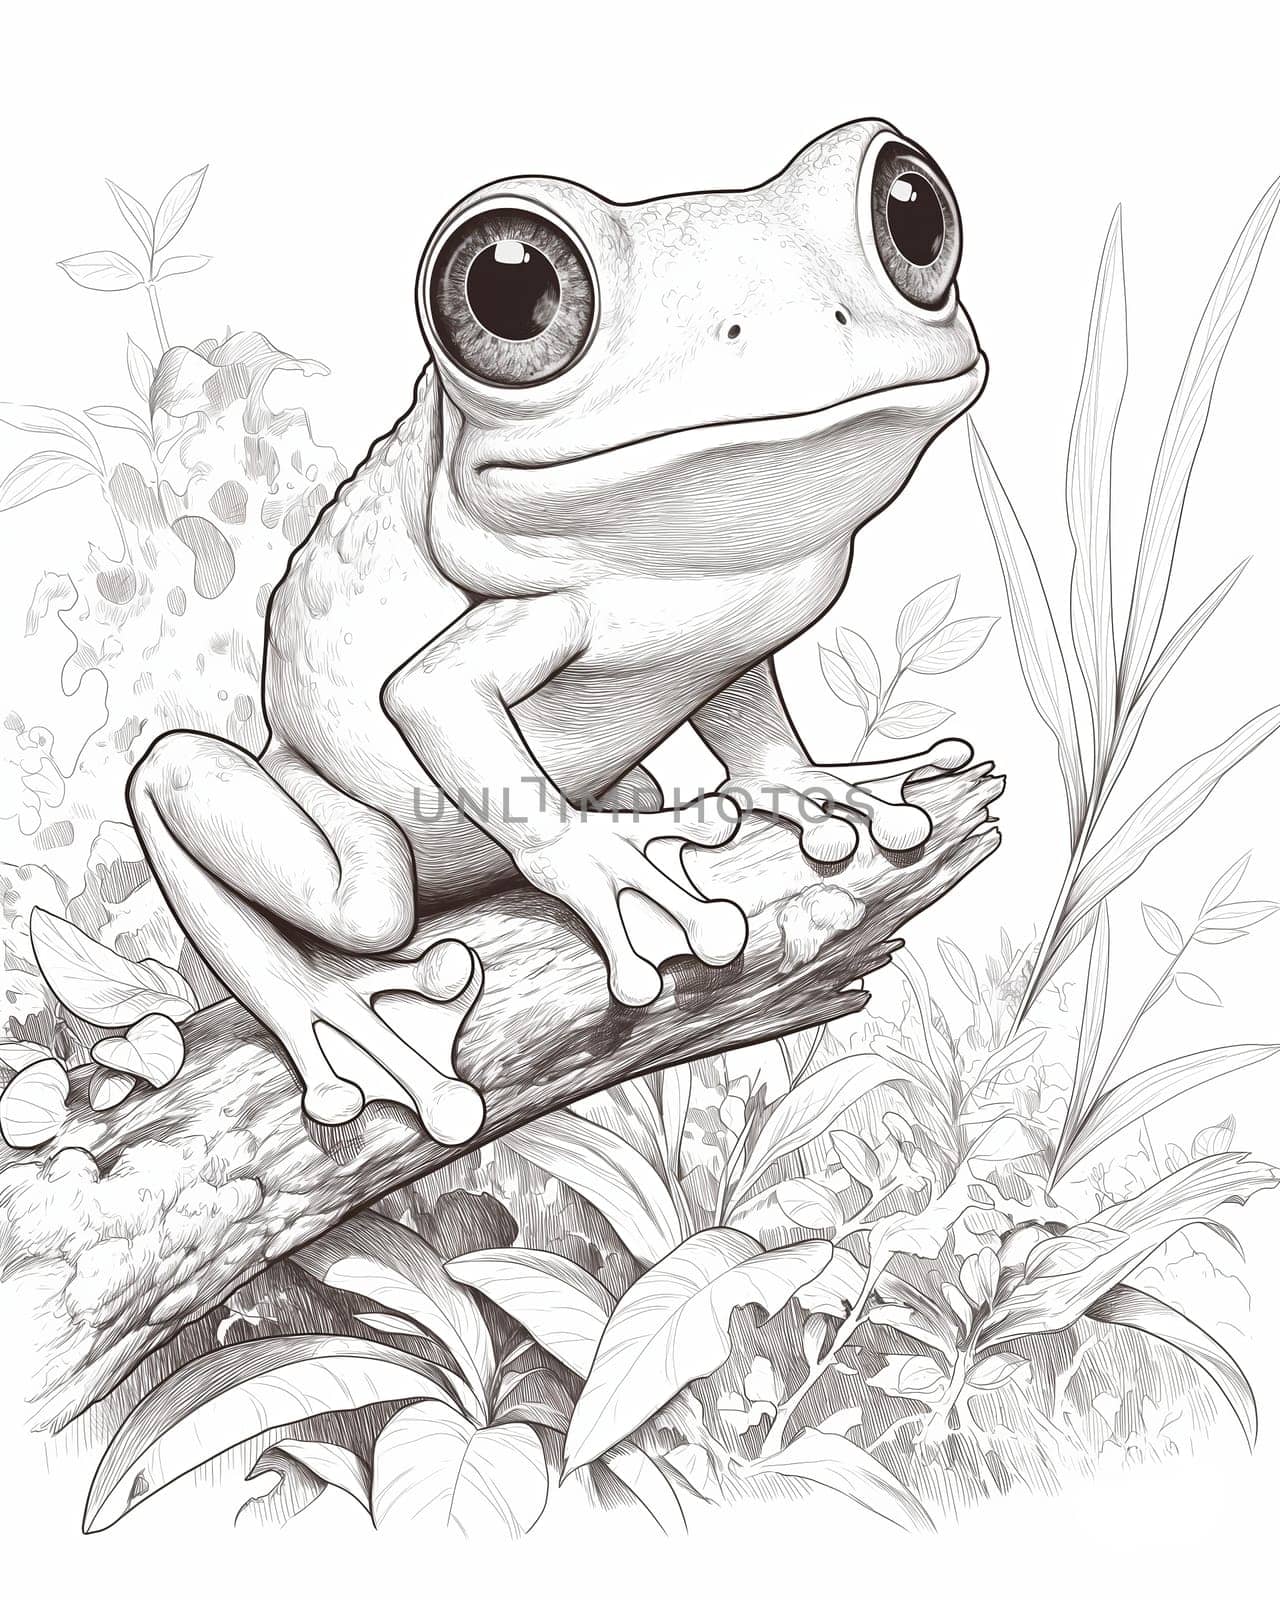 Coloring book for kids, animal coloring, frog. by Fischeron